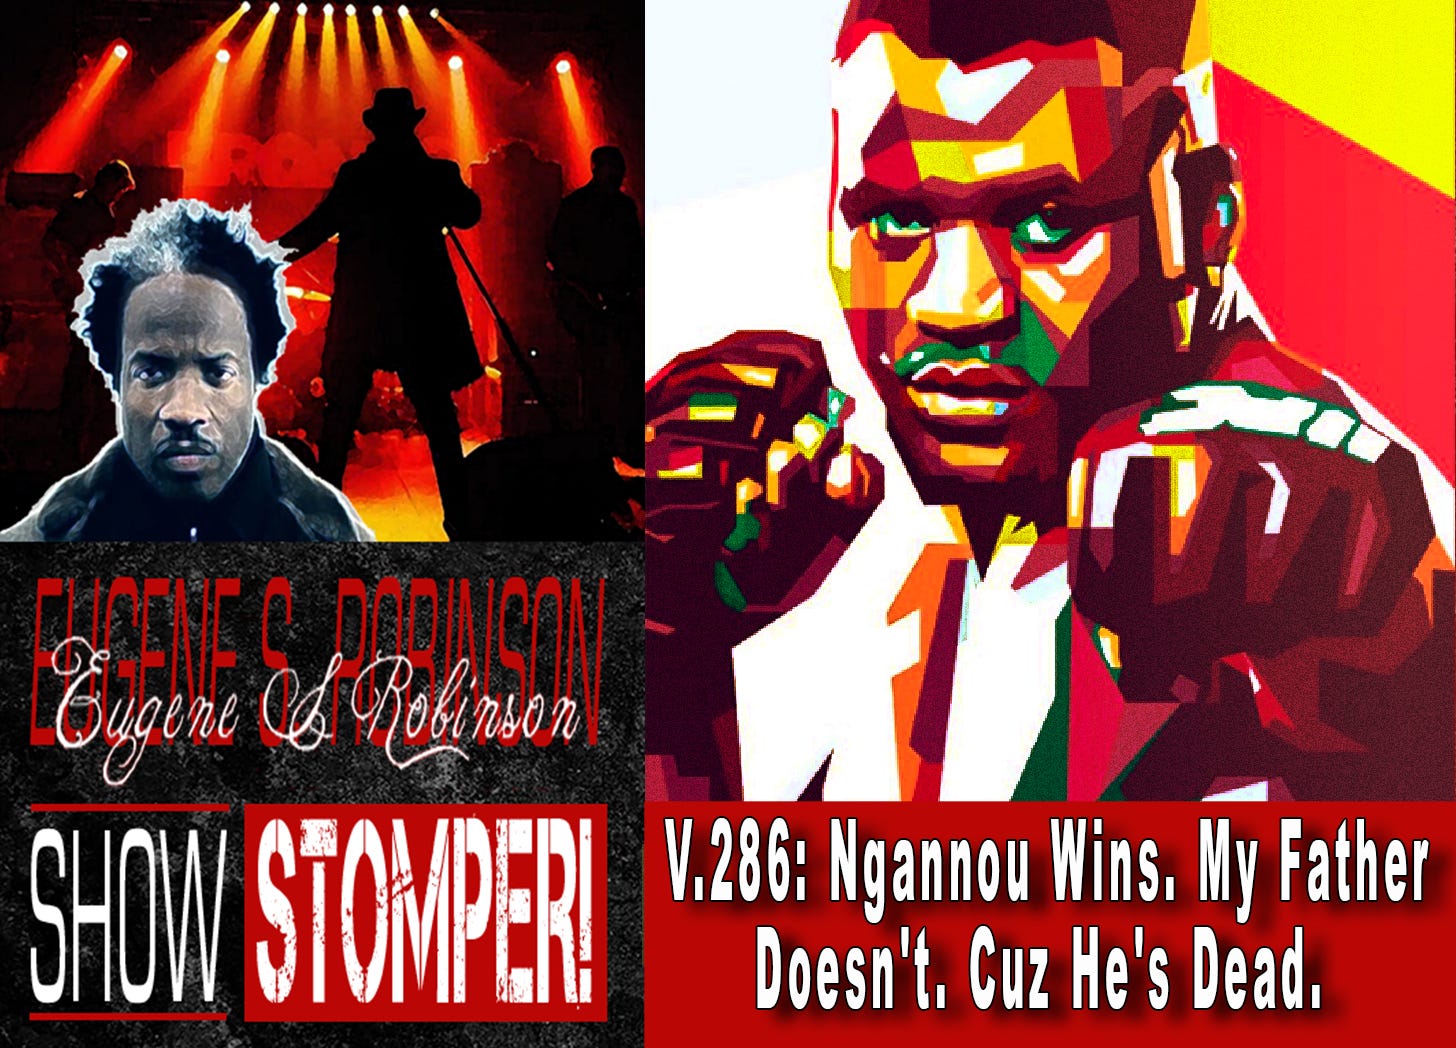 V.286: Ngannou Wins. My Father Doesn't. Cuz He's Dead. All On The Eugene S. Robinson Show Stomper!